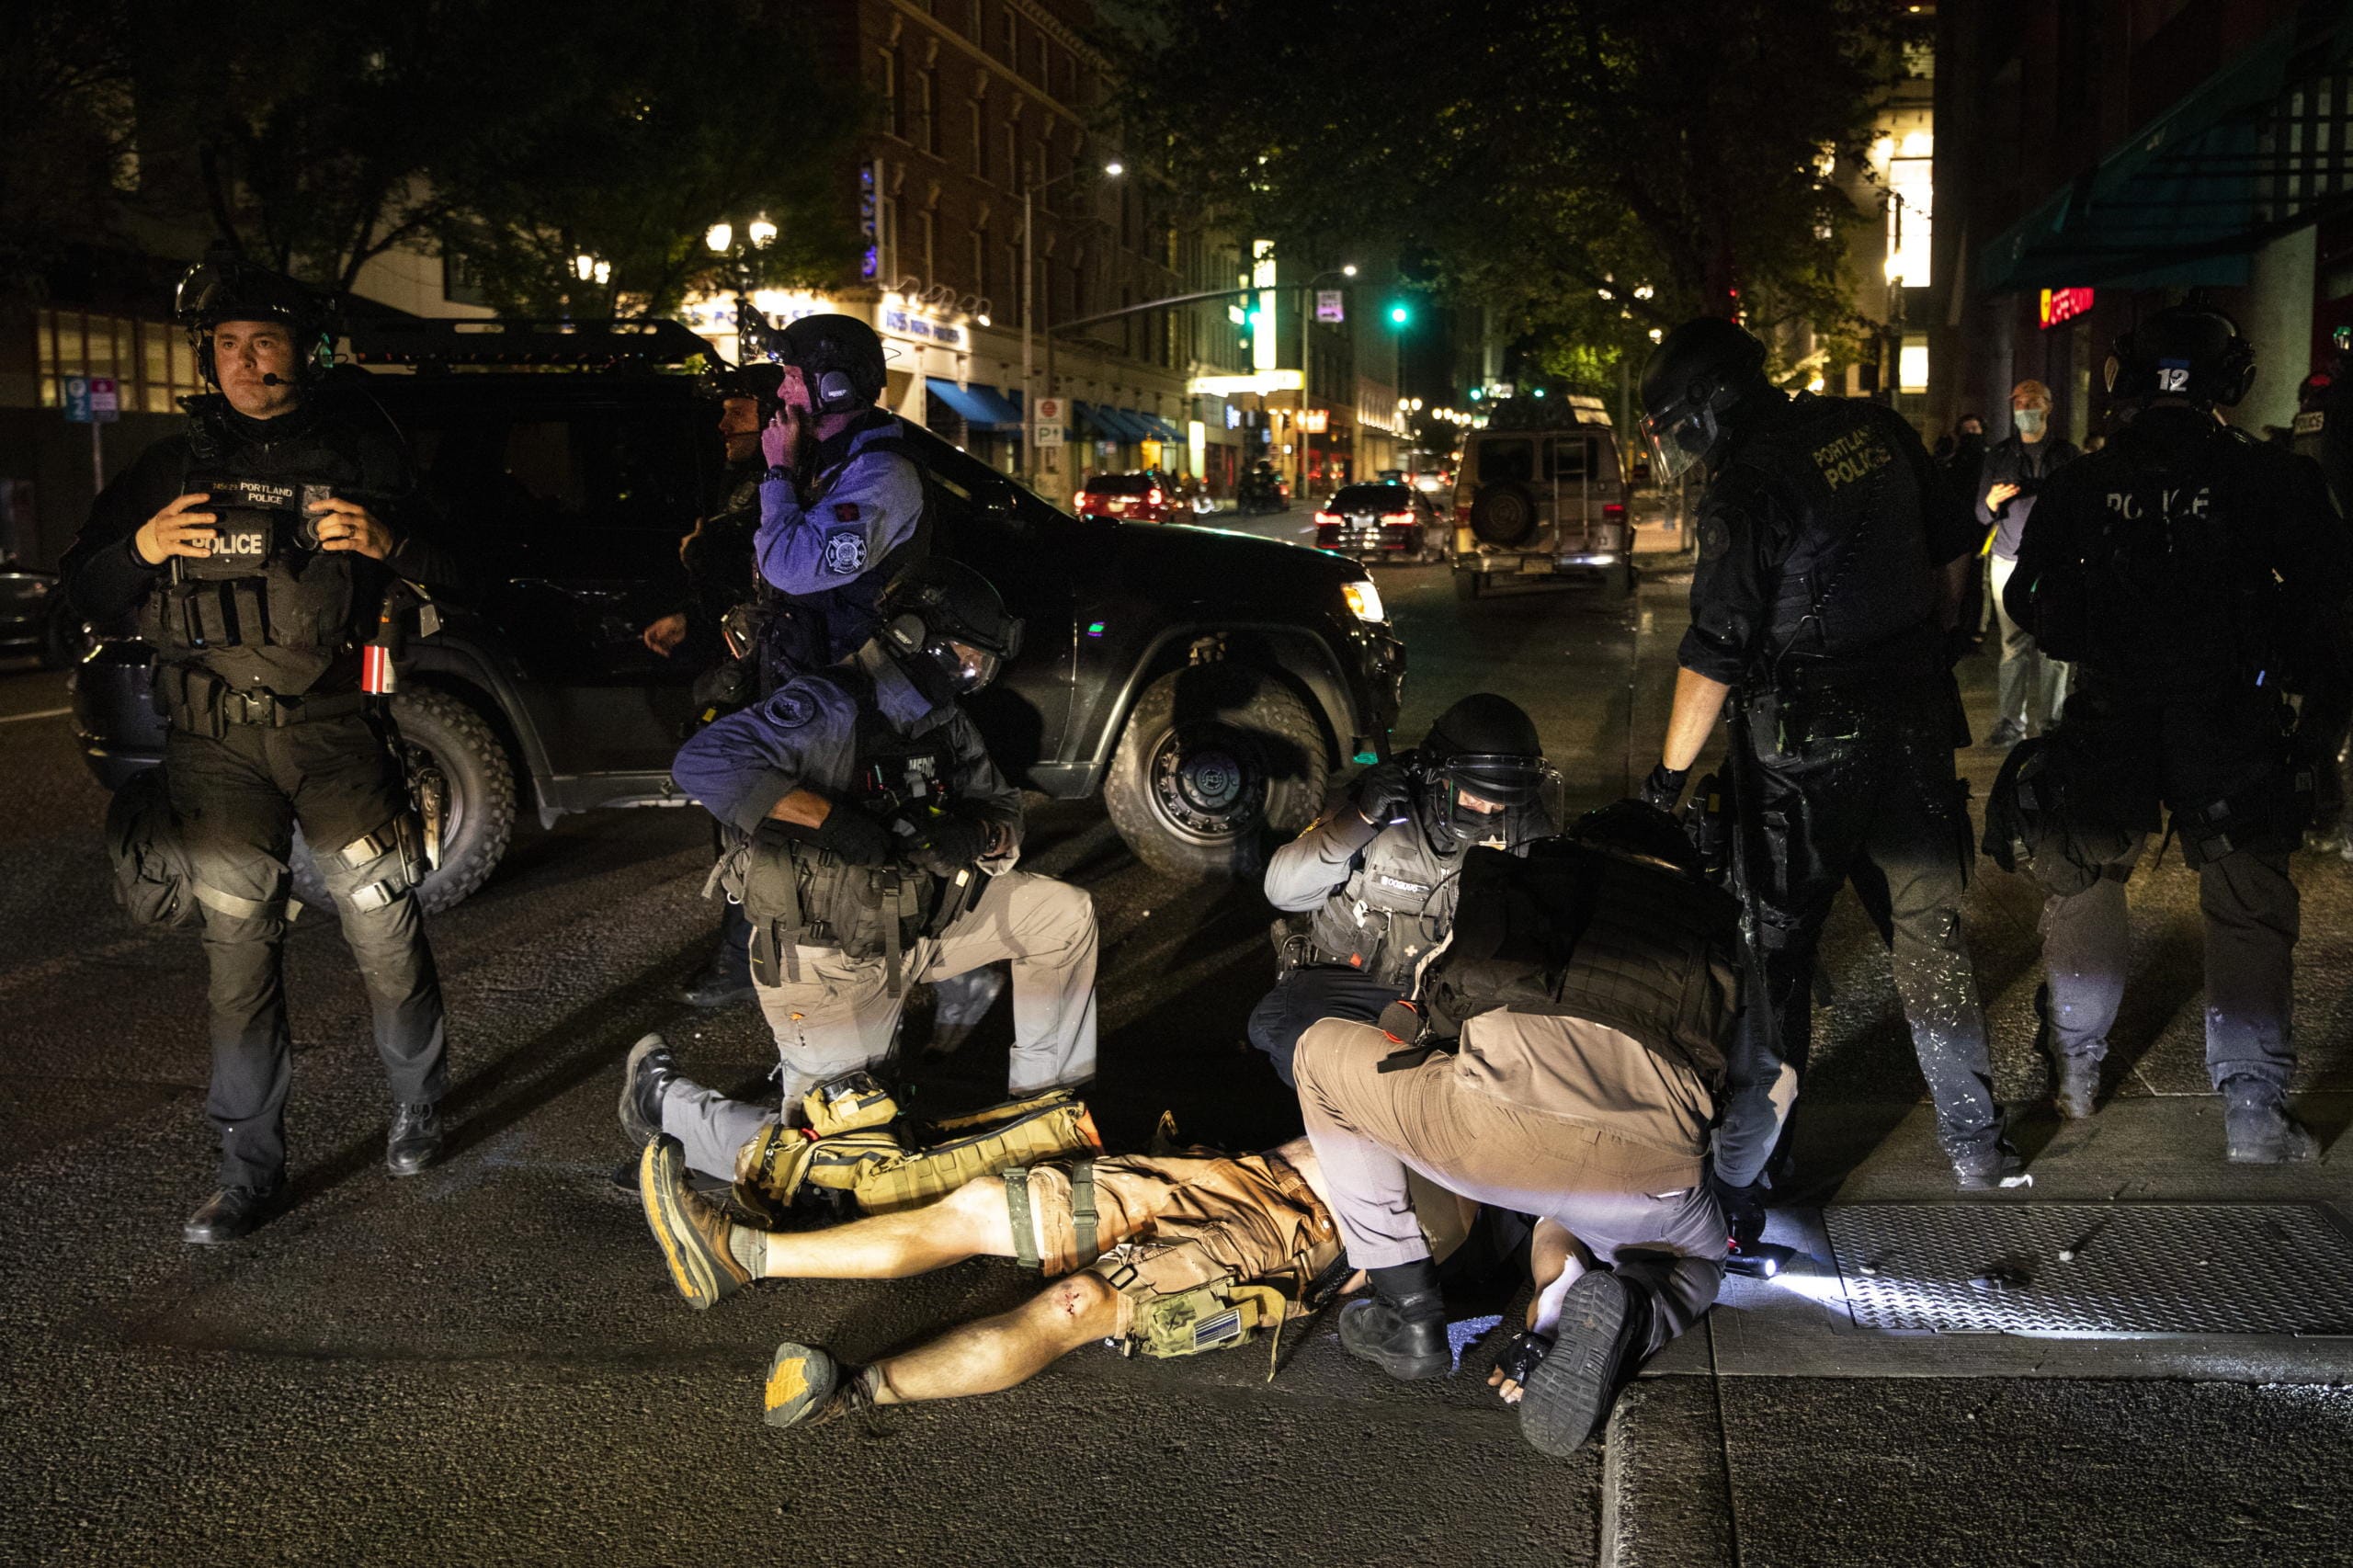 A man is being treated after being shot Saturday, Aug. 29, 2020, in Portland, Ore. Fights broke out in downtown Portland Saturday night as a large caravan of supporters of President Donald Trump drove through the city, clashing with counter-protesters.